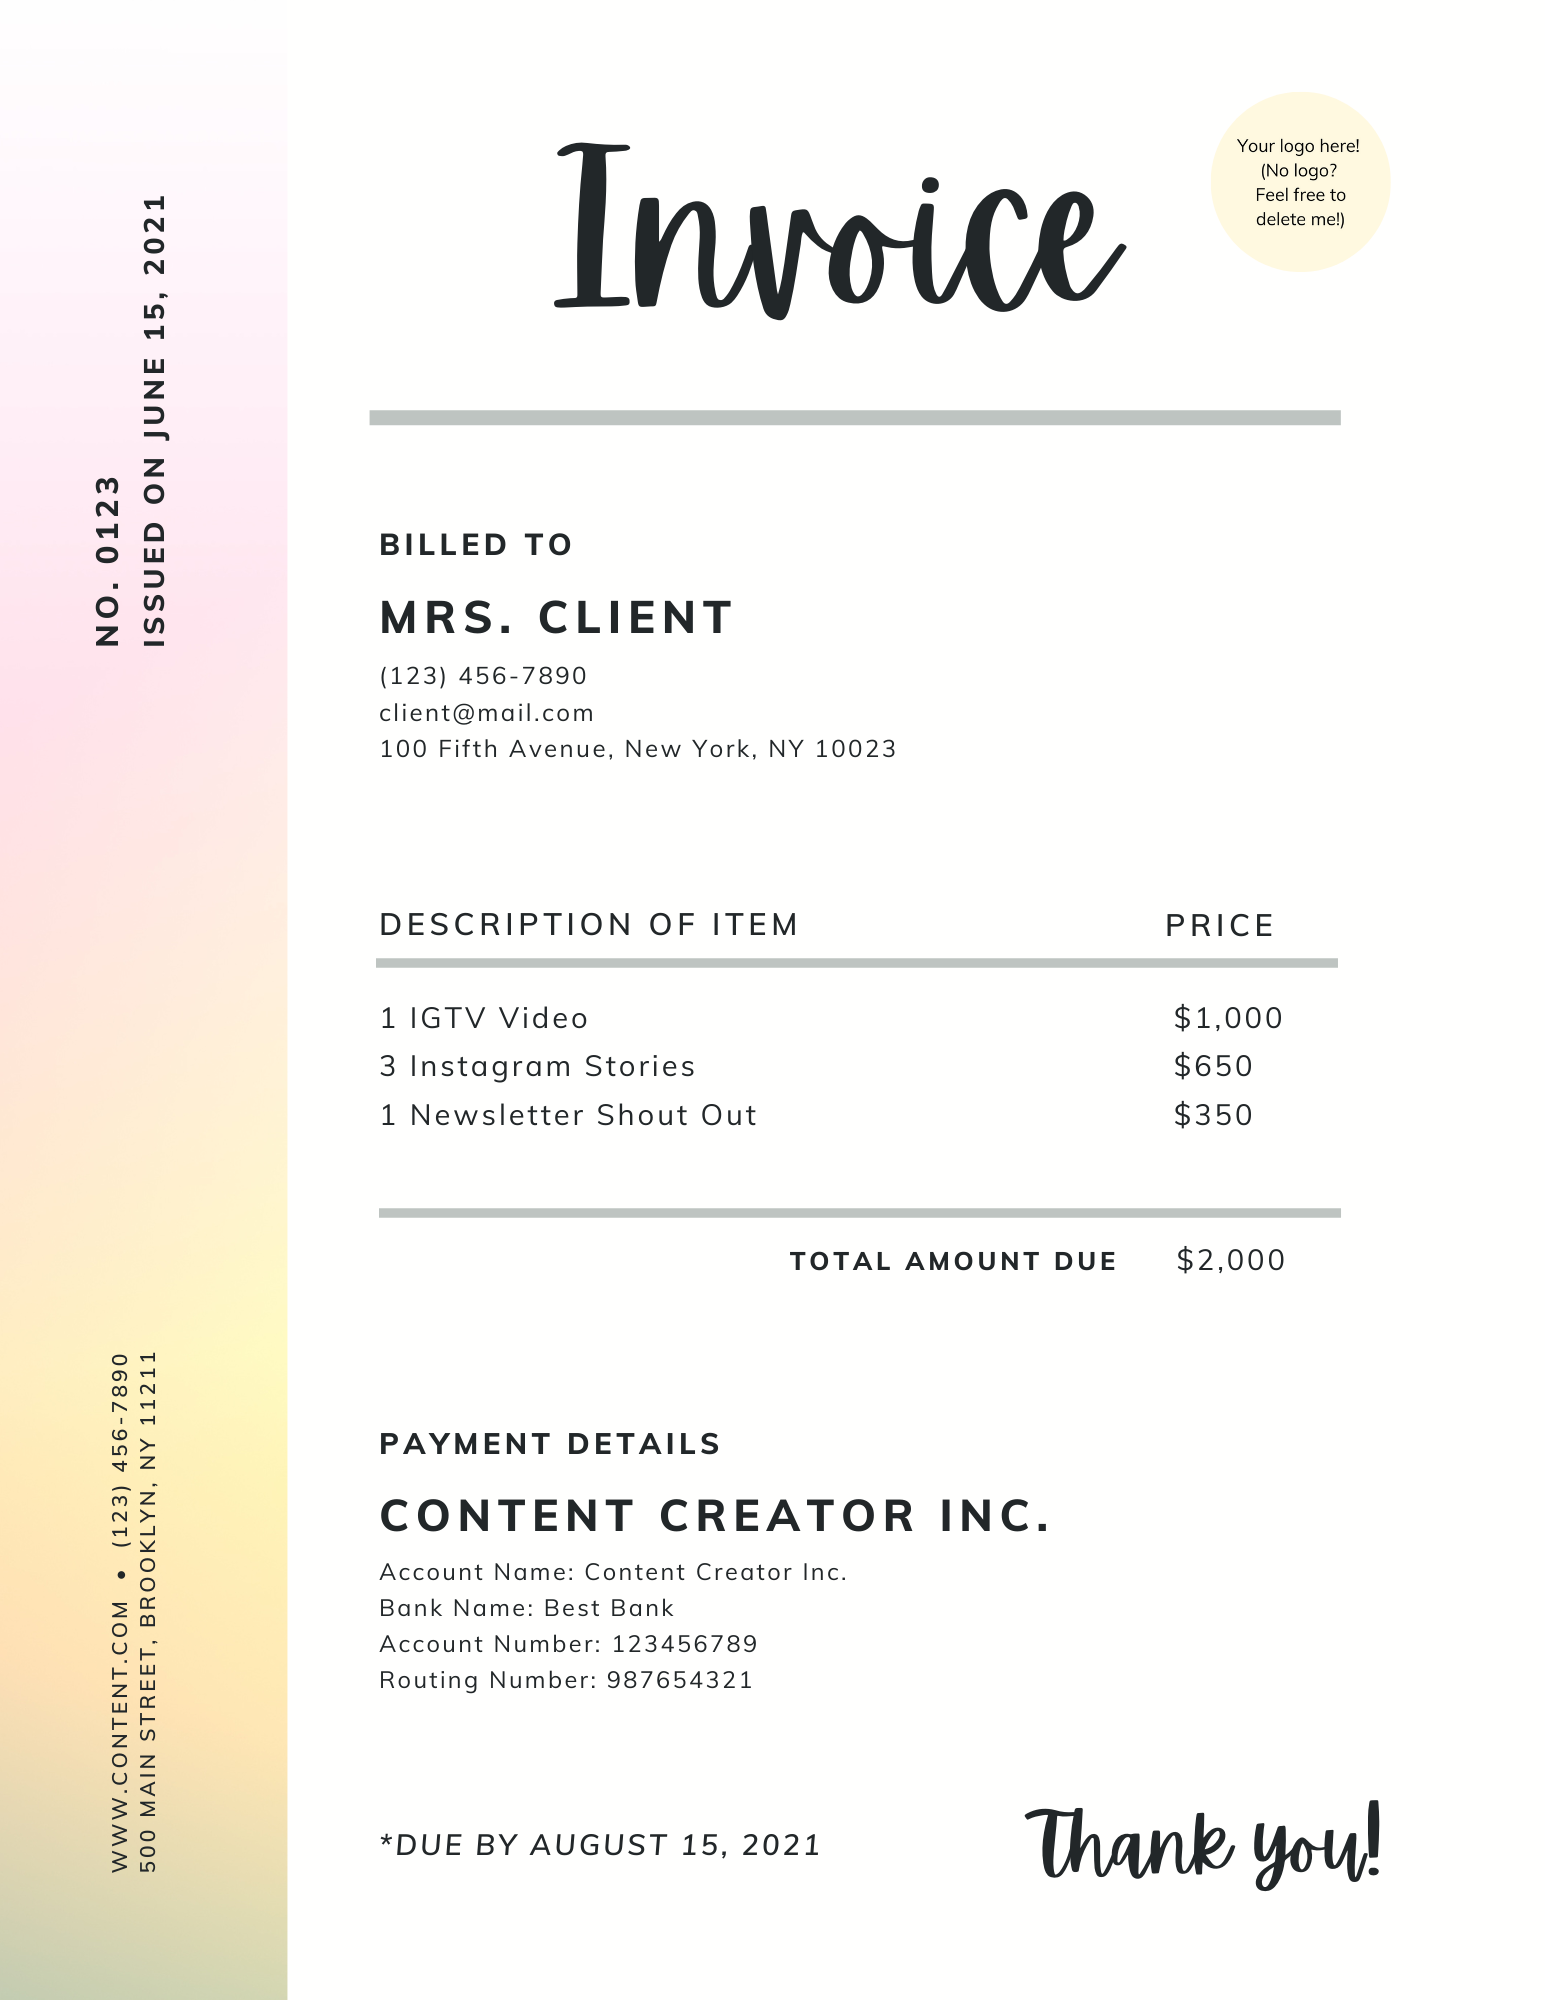 invoice png